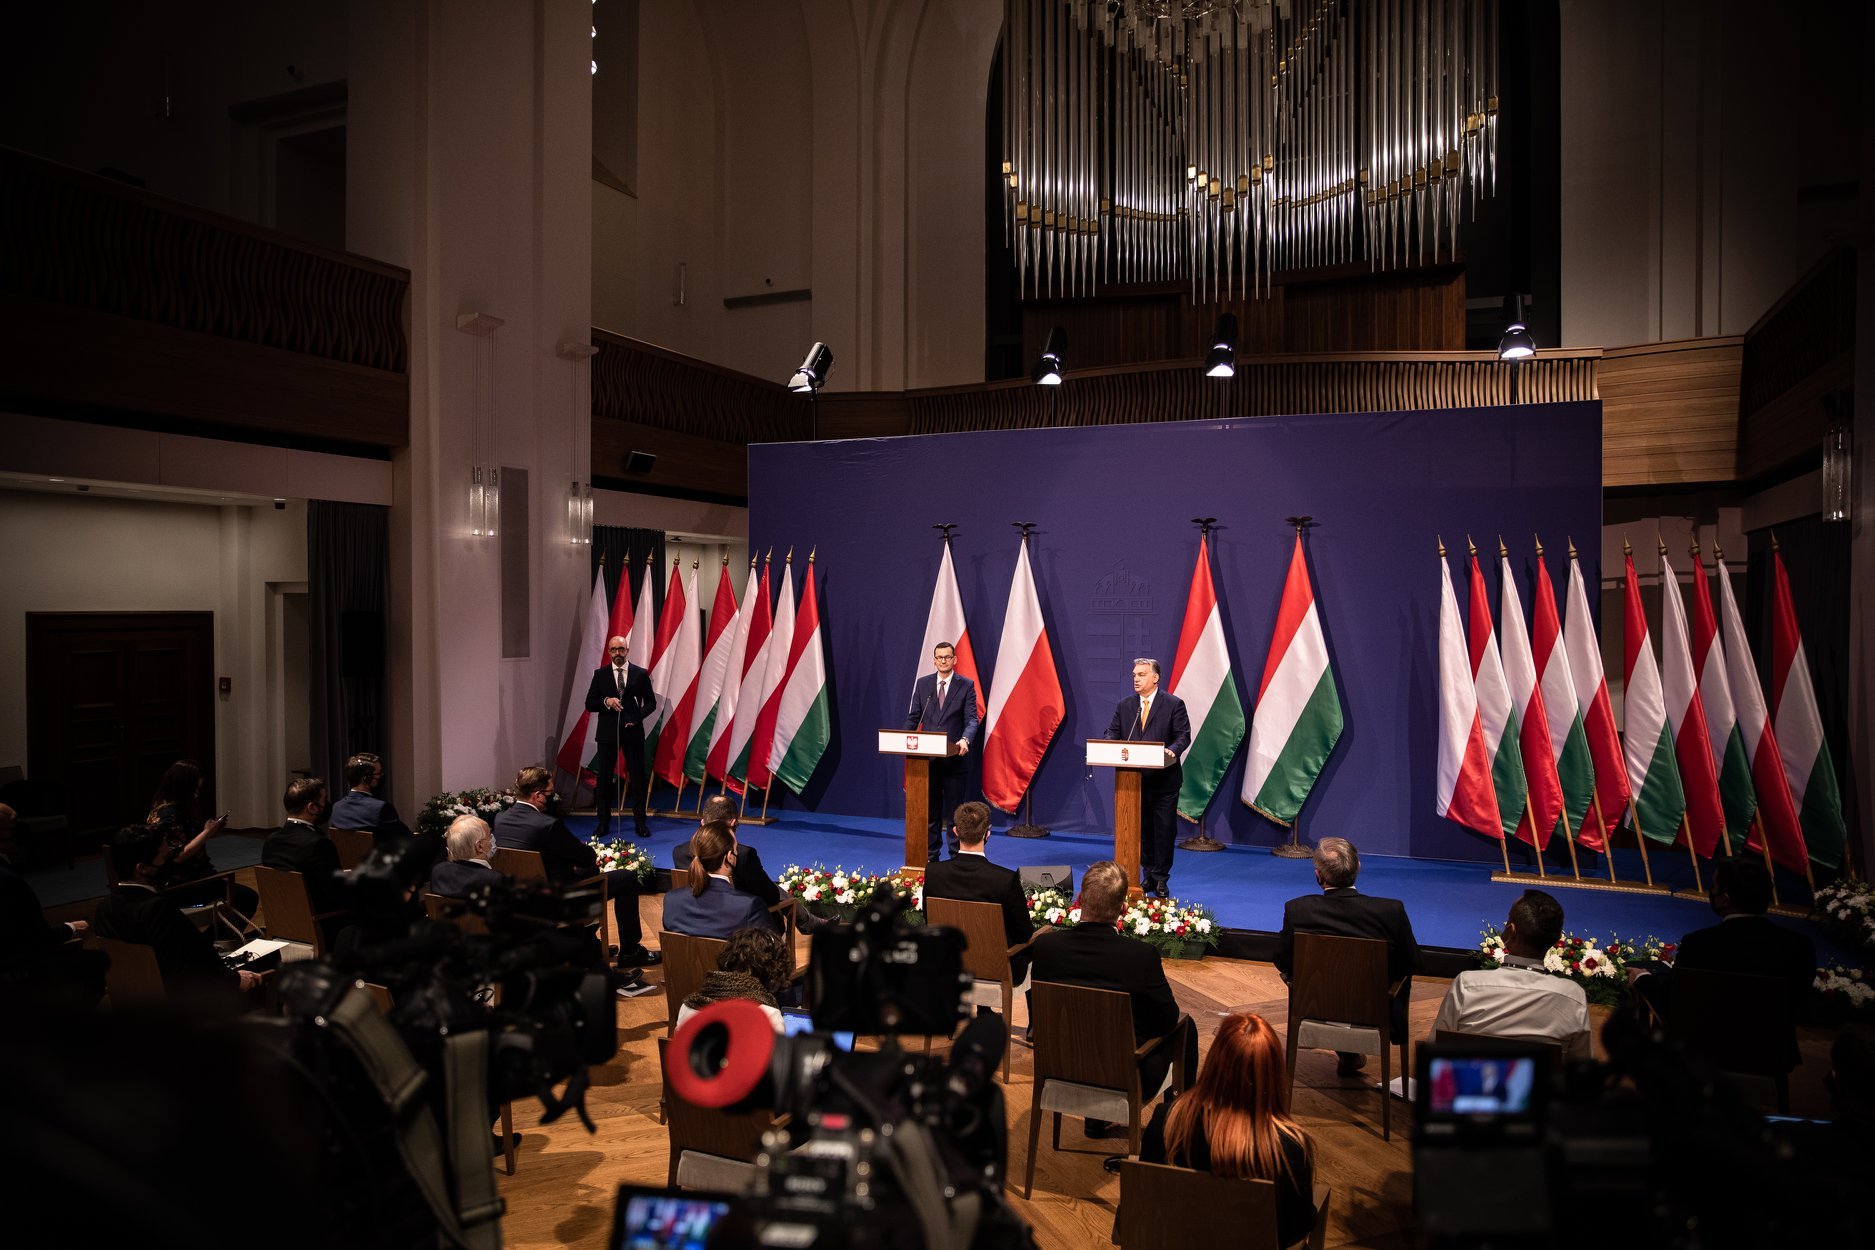 Poland and Hungary oppose linking the EU budget to the rule of law on the coordination of the EU's long-term budget